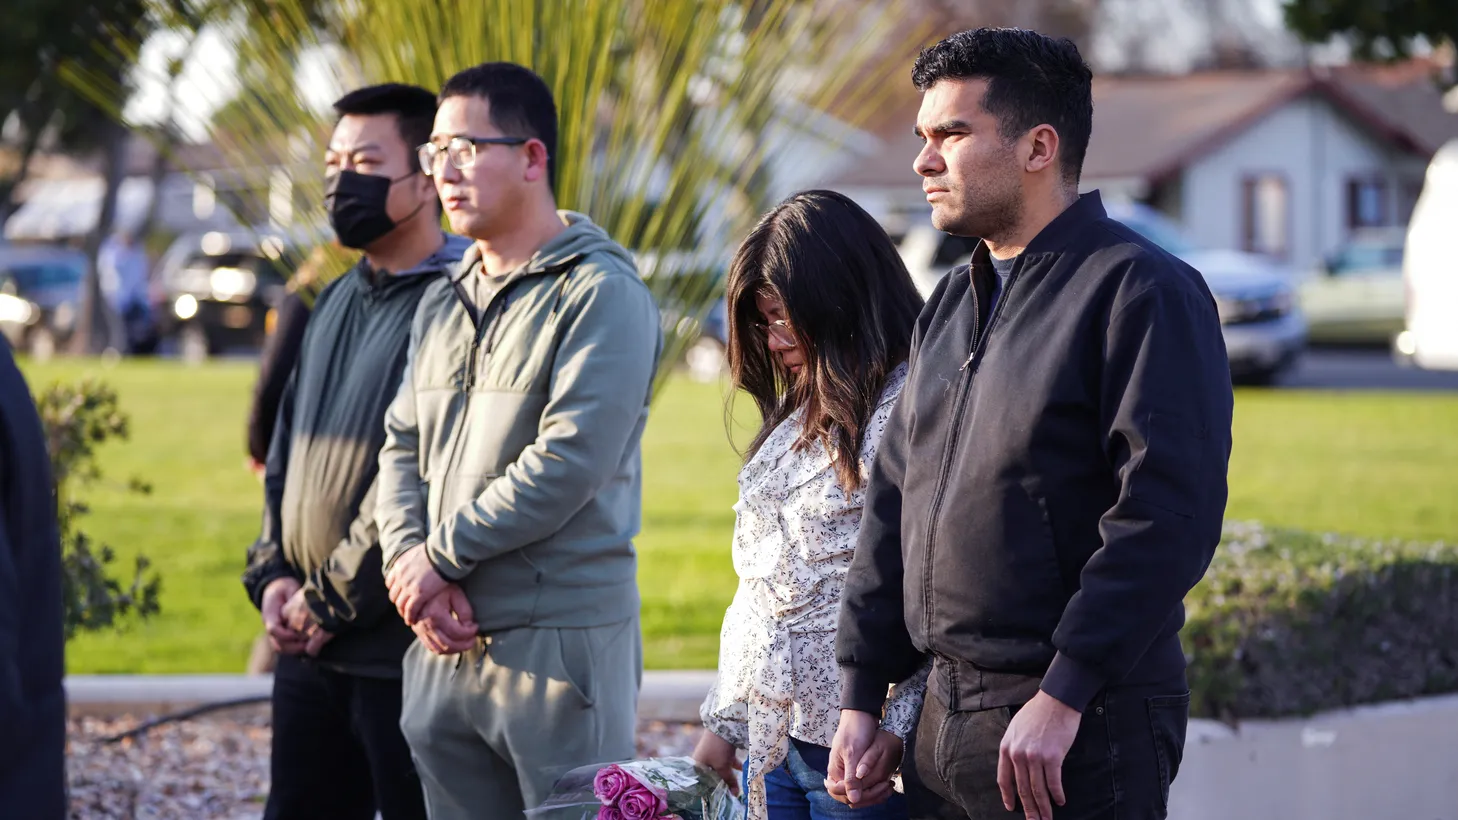 Members of the community hold a prayer vigil near the scene of a shooting that took place during a Lunar New Year celebration, in Monterey Park, California, U.S. January 22, 2023.